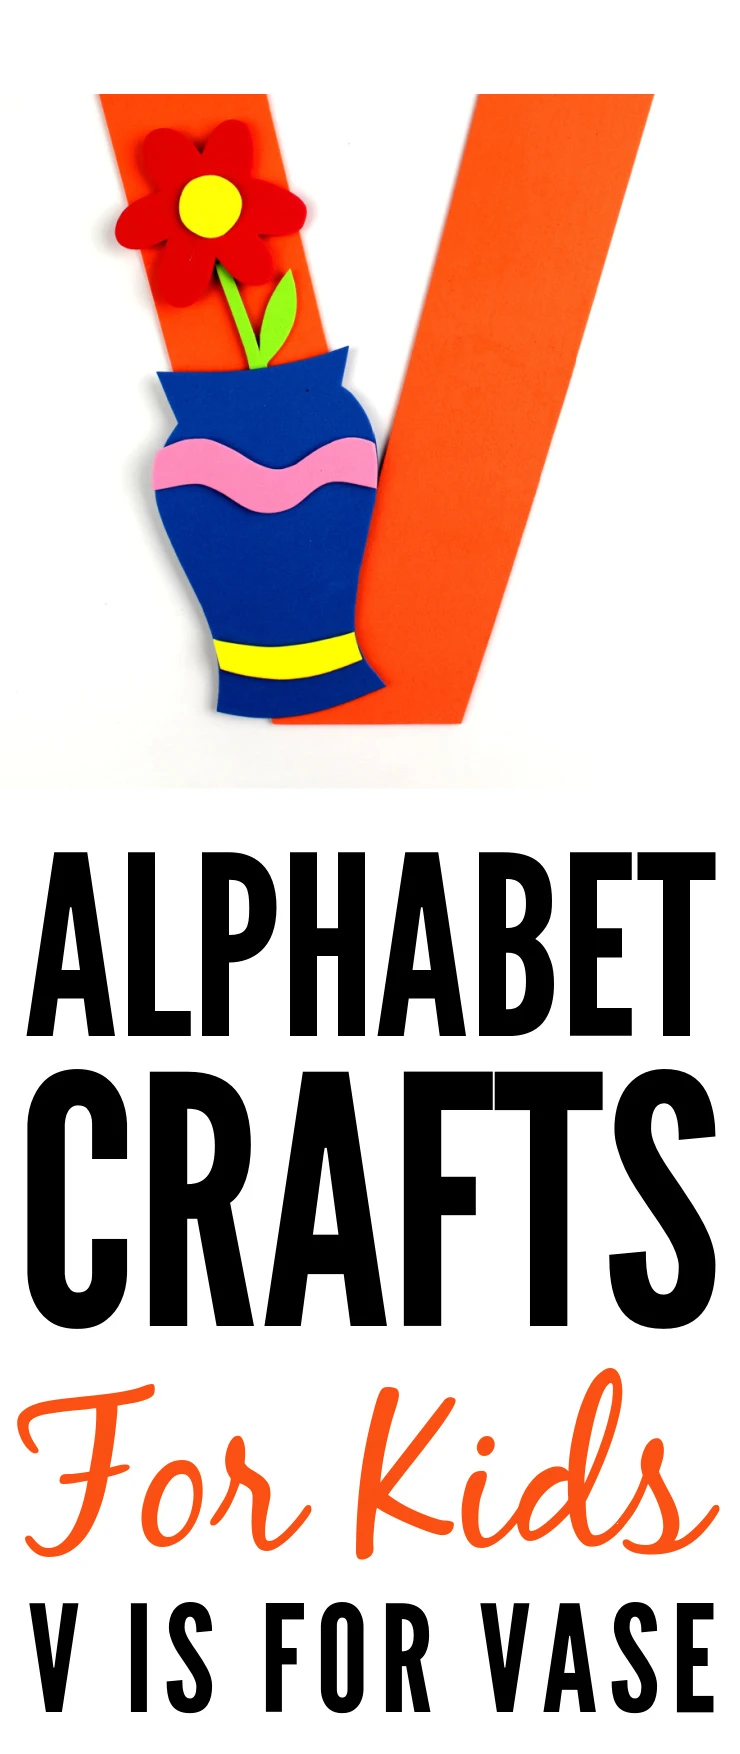 This week in my series of ABCs kids crafts featuring the Alphabet, we are doing a V is for Vase craft. These Alphabet Crafts For Kids are a fun way to introduce your child to the alphabet.